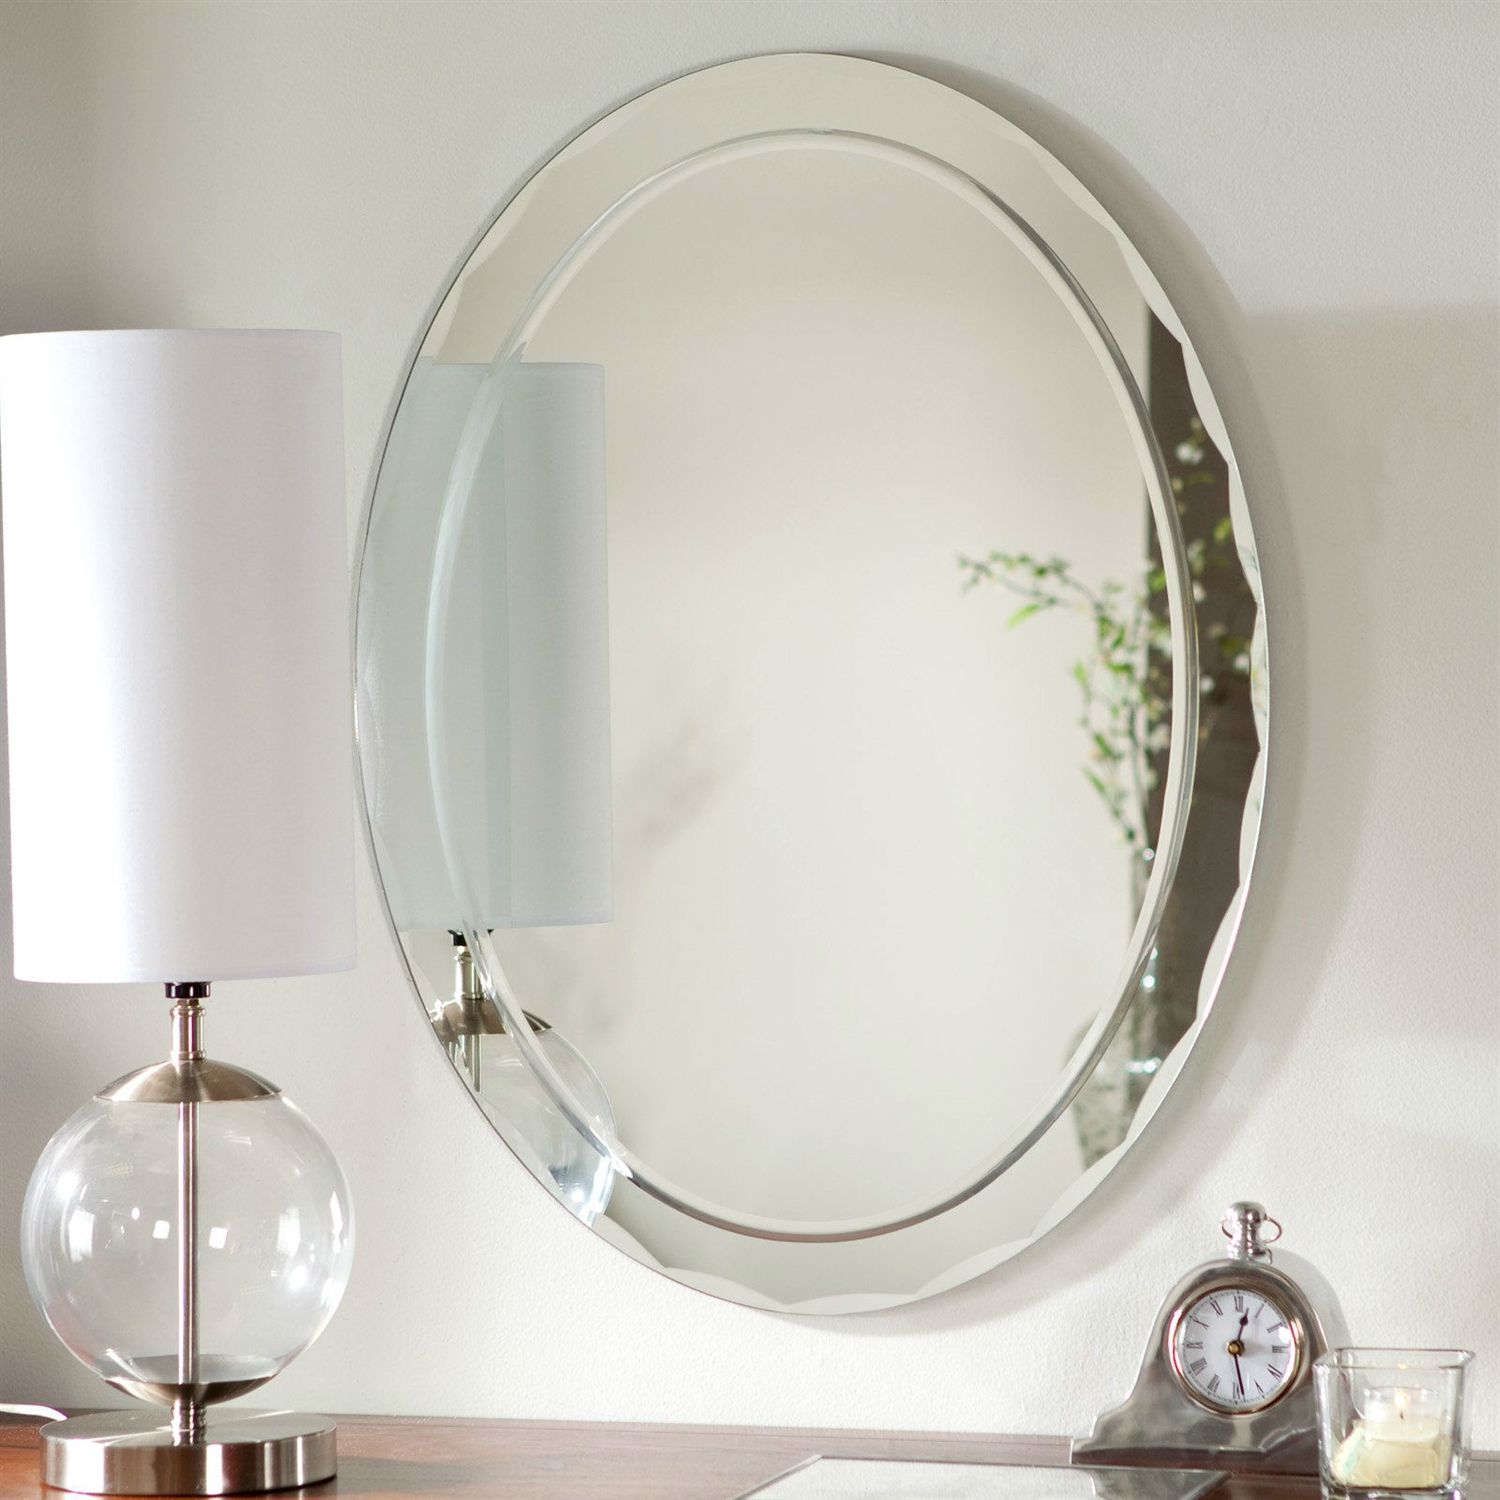 Trendy Round Scalloped Edge Wall Mirrors With Oval Frameless Bathroom Vanity Wall Mirror With Beveled Edge Scallop Border (View 11 of 15)